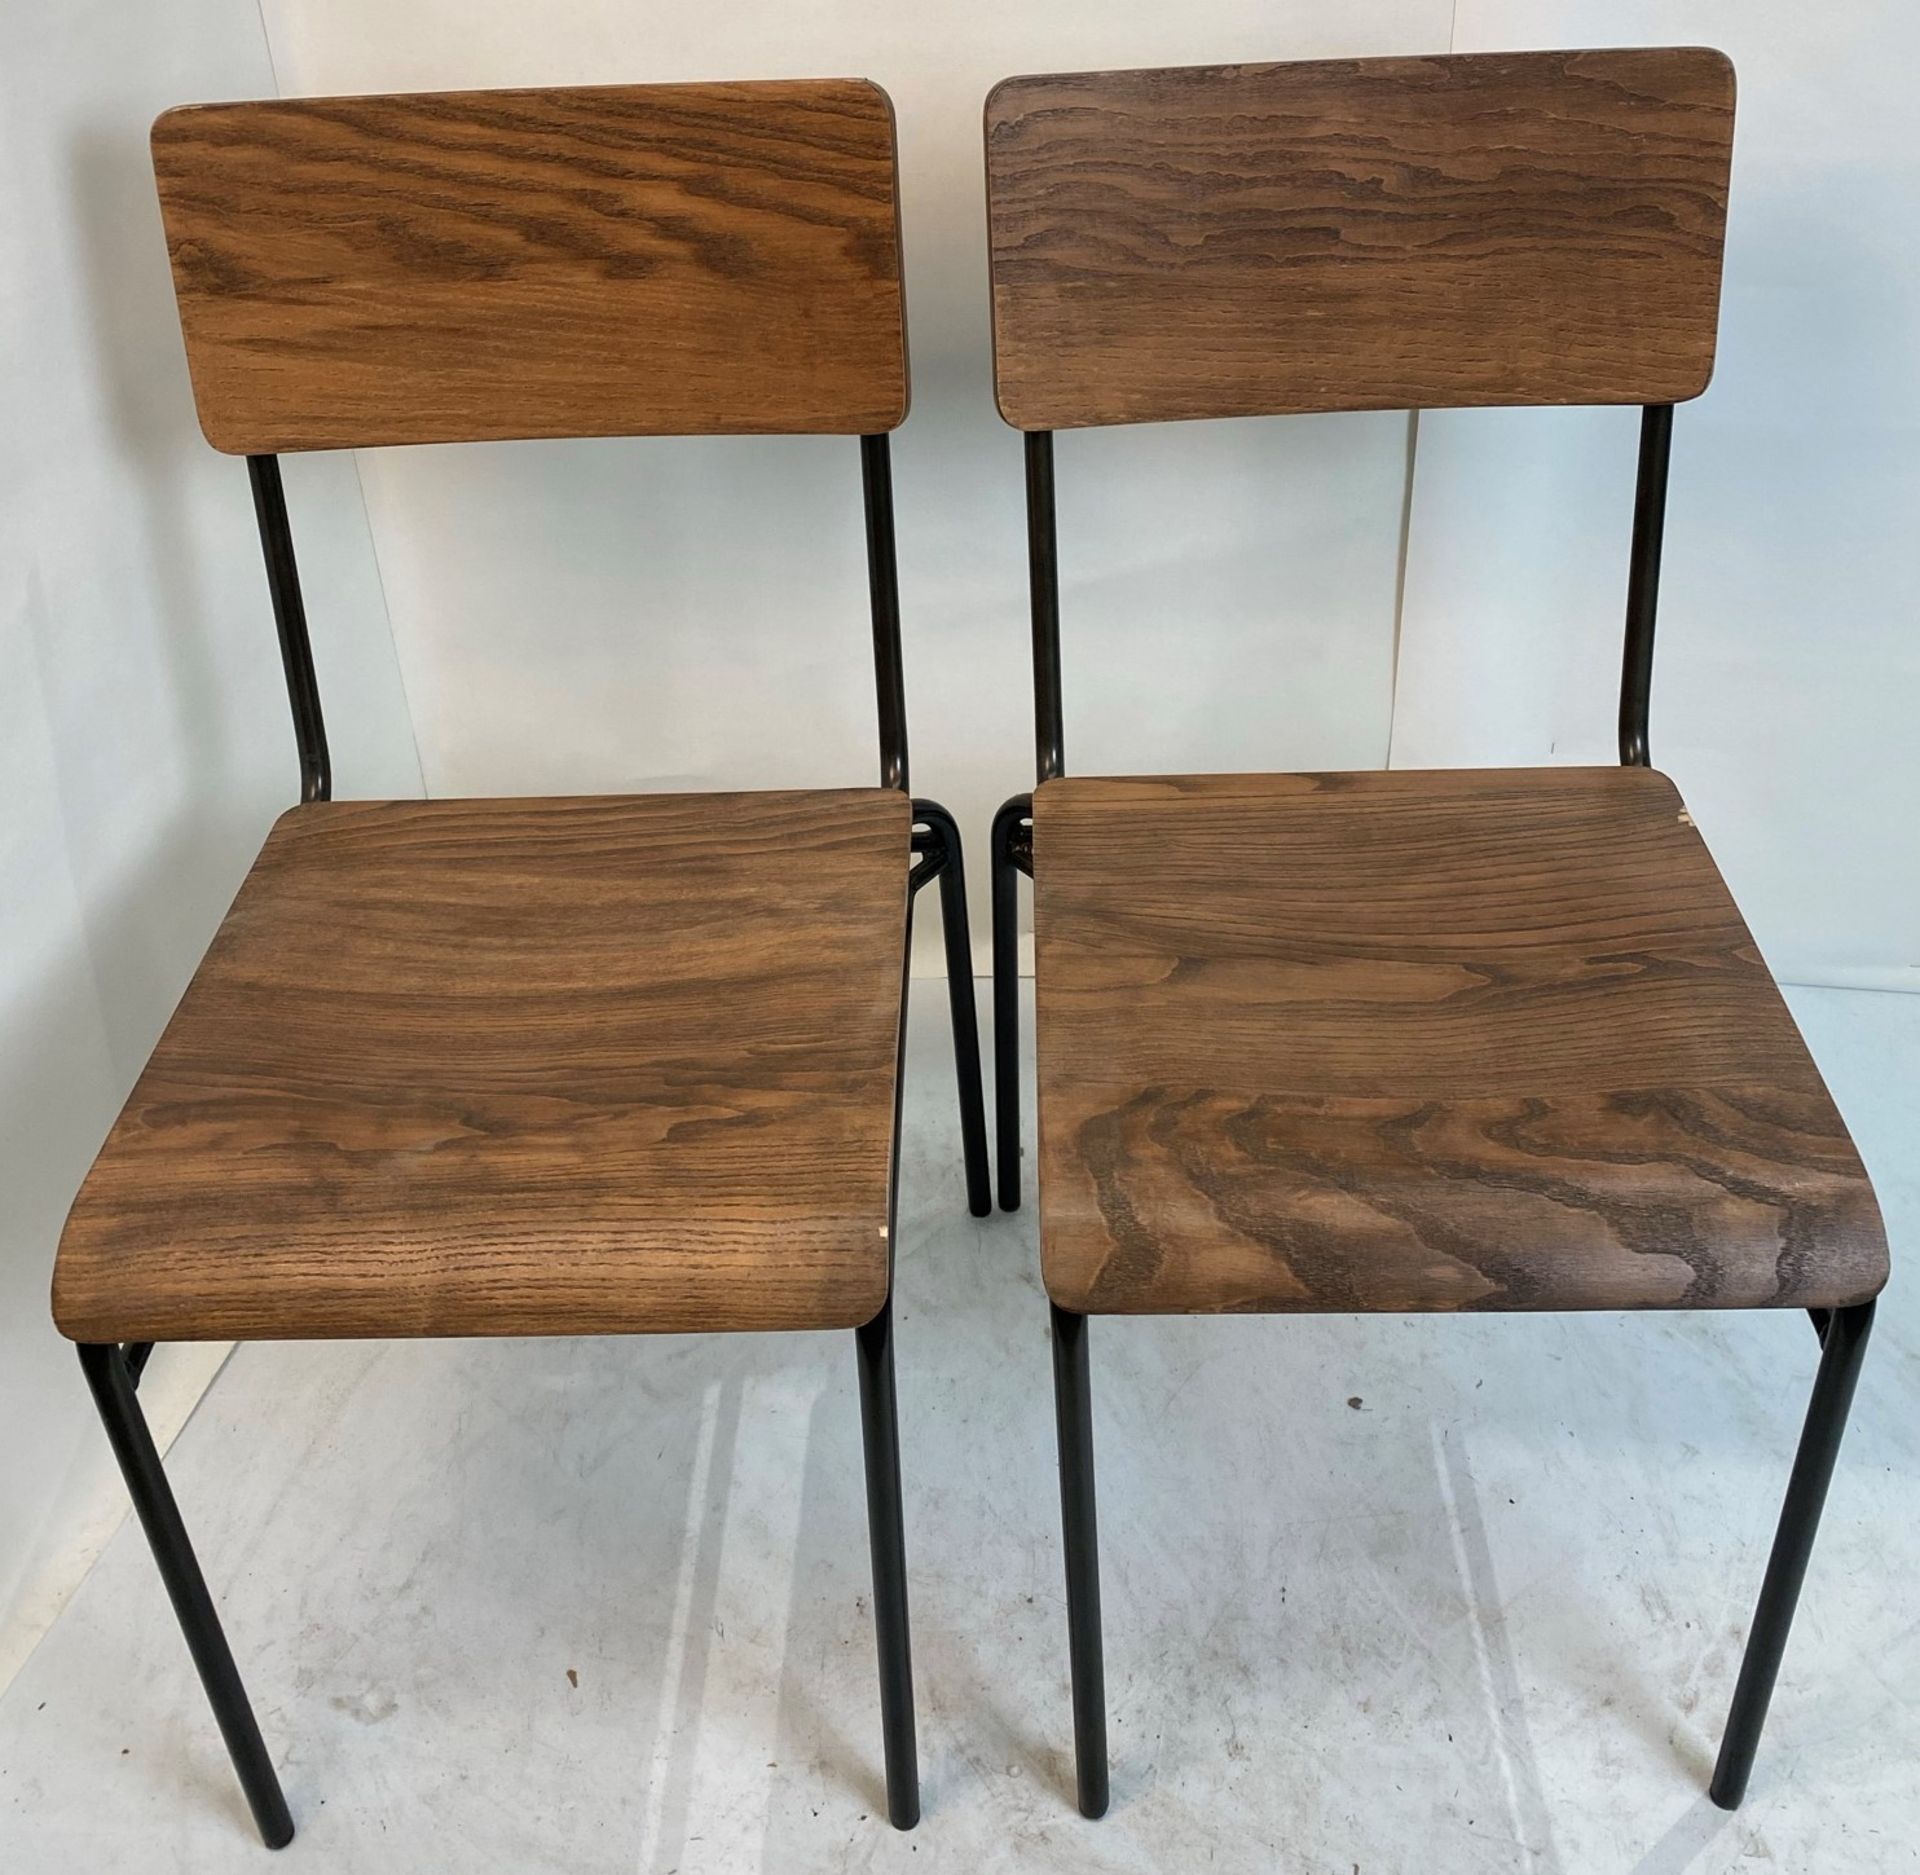 2 x Dark wood effect stacking chairs with black metal frames - Pleae note slight chip to rear right